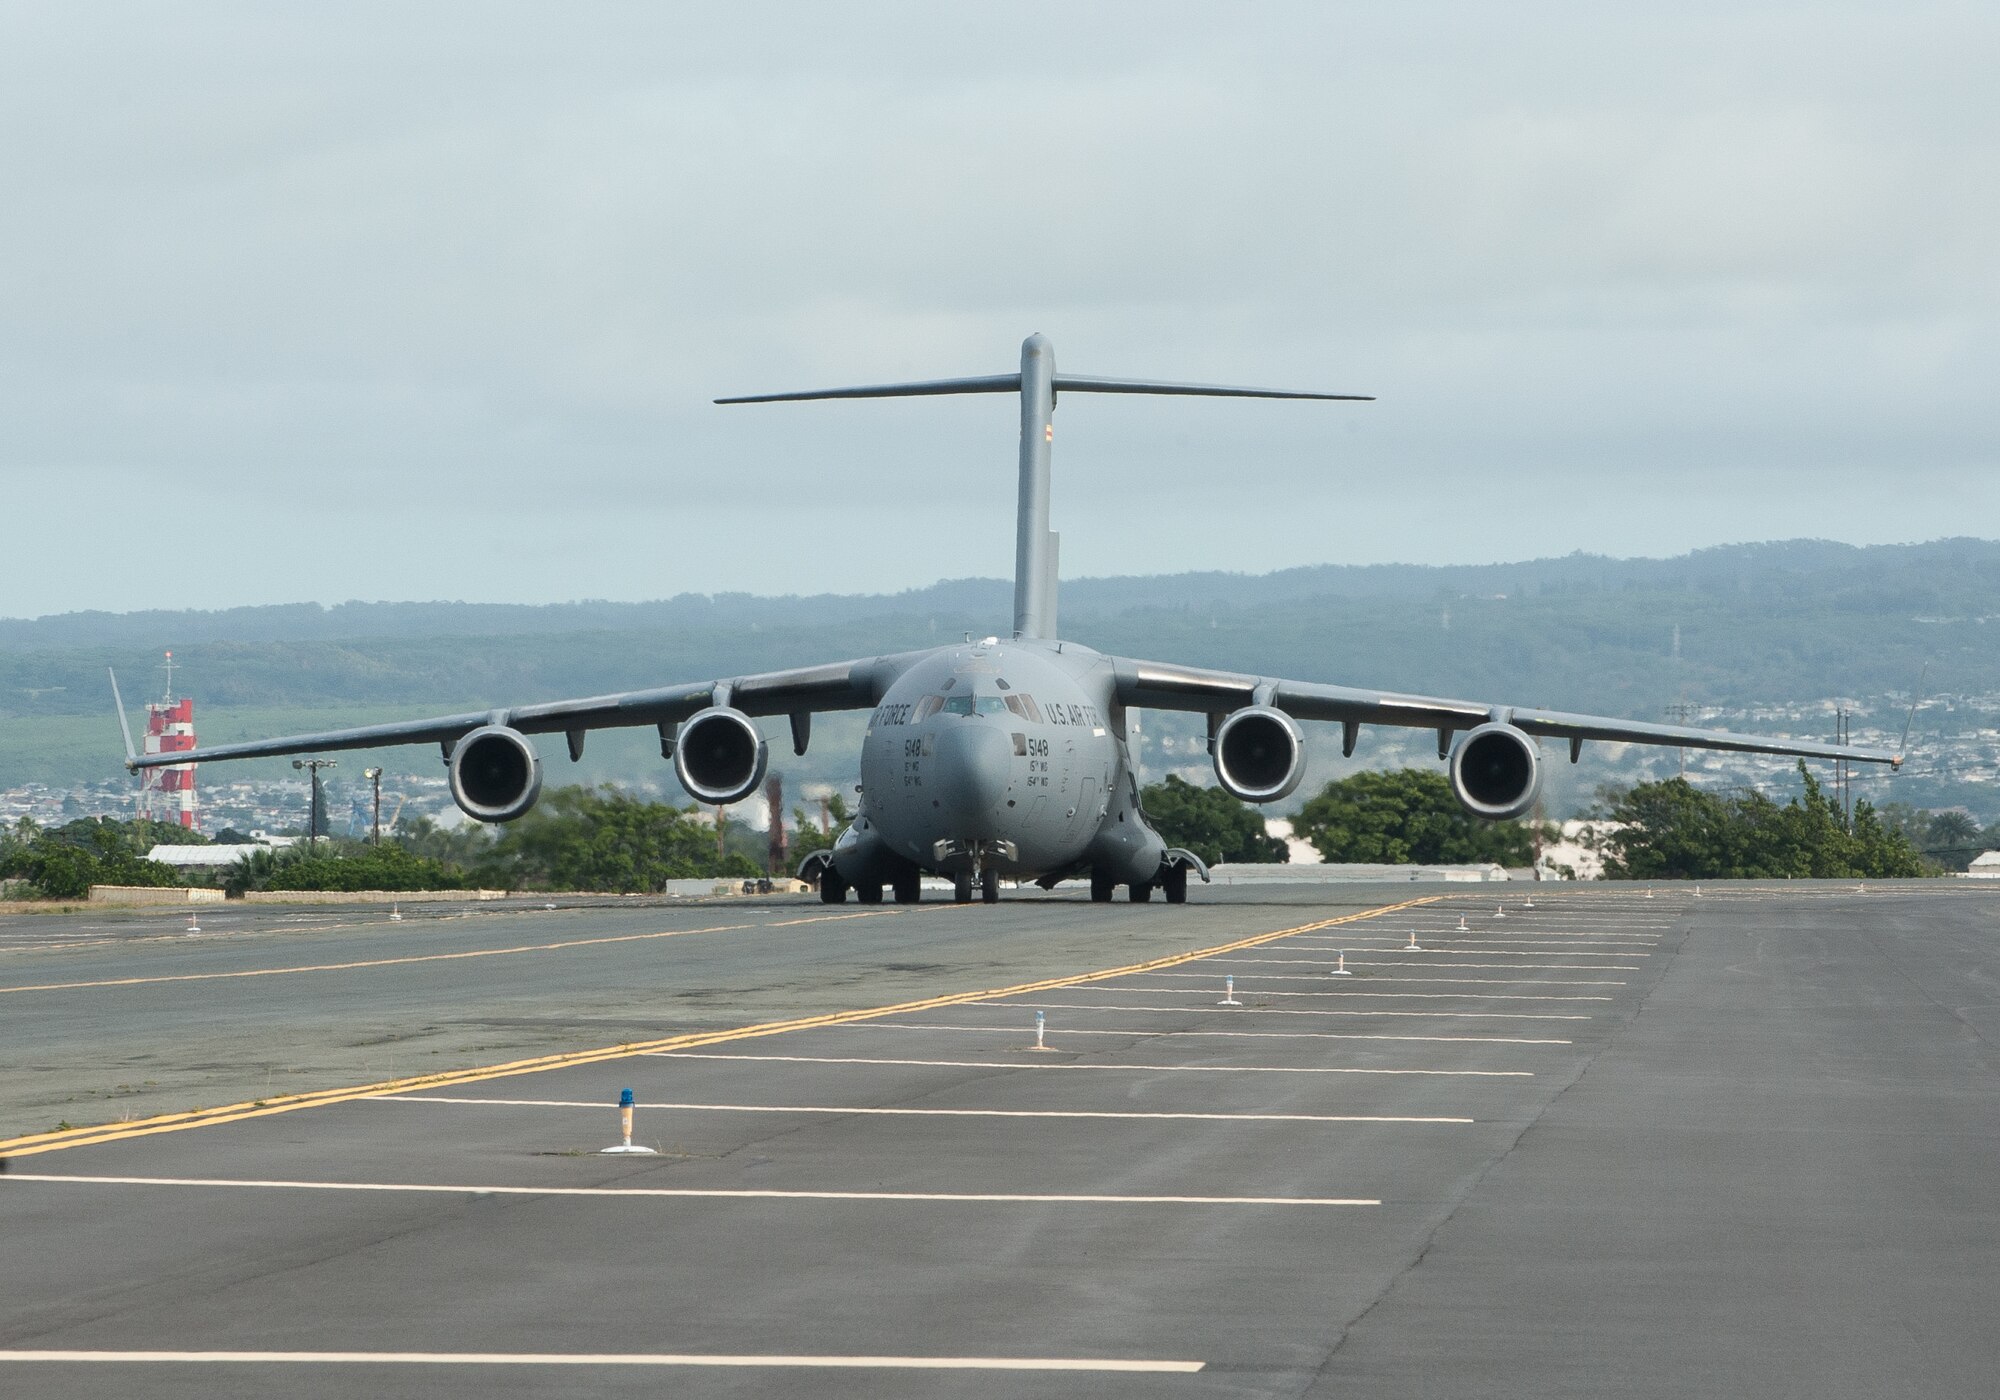 A 535th Airlift Squadron A C-17 Globemaster III  taxis on the flightline at Joint Base Pearl Harbor-Hickam, Hawaii, April  3, 2020.  The 735th Air Mobility Squadron loaded 31,063 pounds of cargo containing COVID-19 personal protective equipment and medical supplies from the CDC and FEMA that were delivered to the Mariana Islands.  (U.S. Air National Guard photo by Senior Airman John Linzmeier)